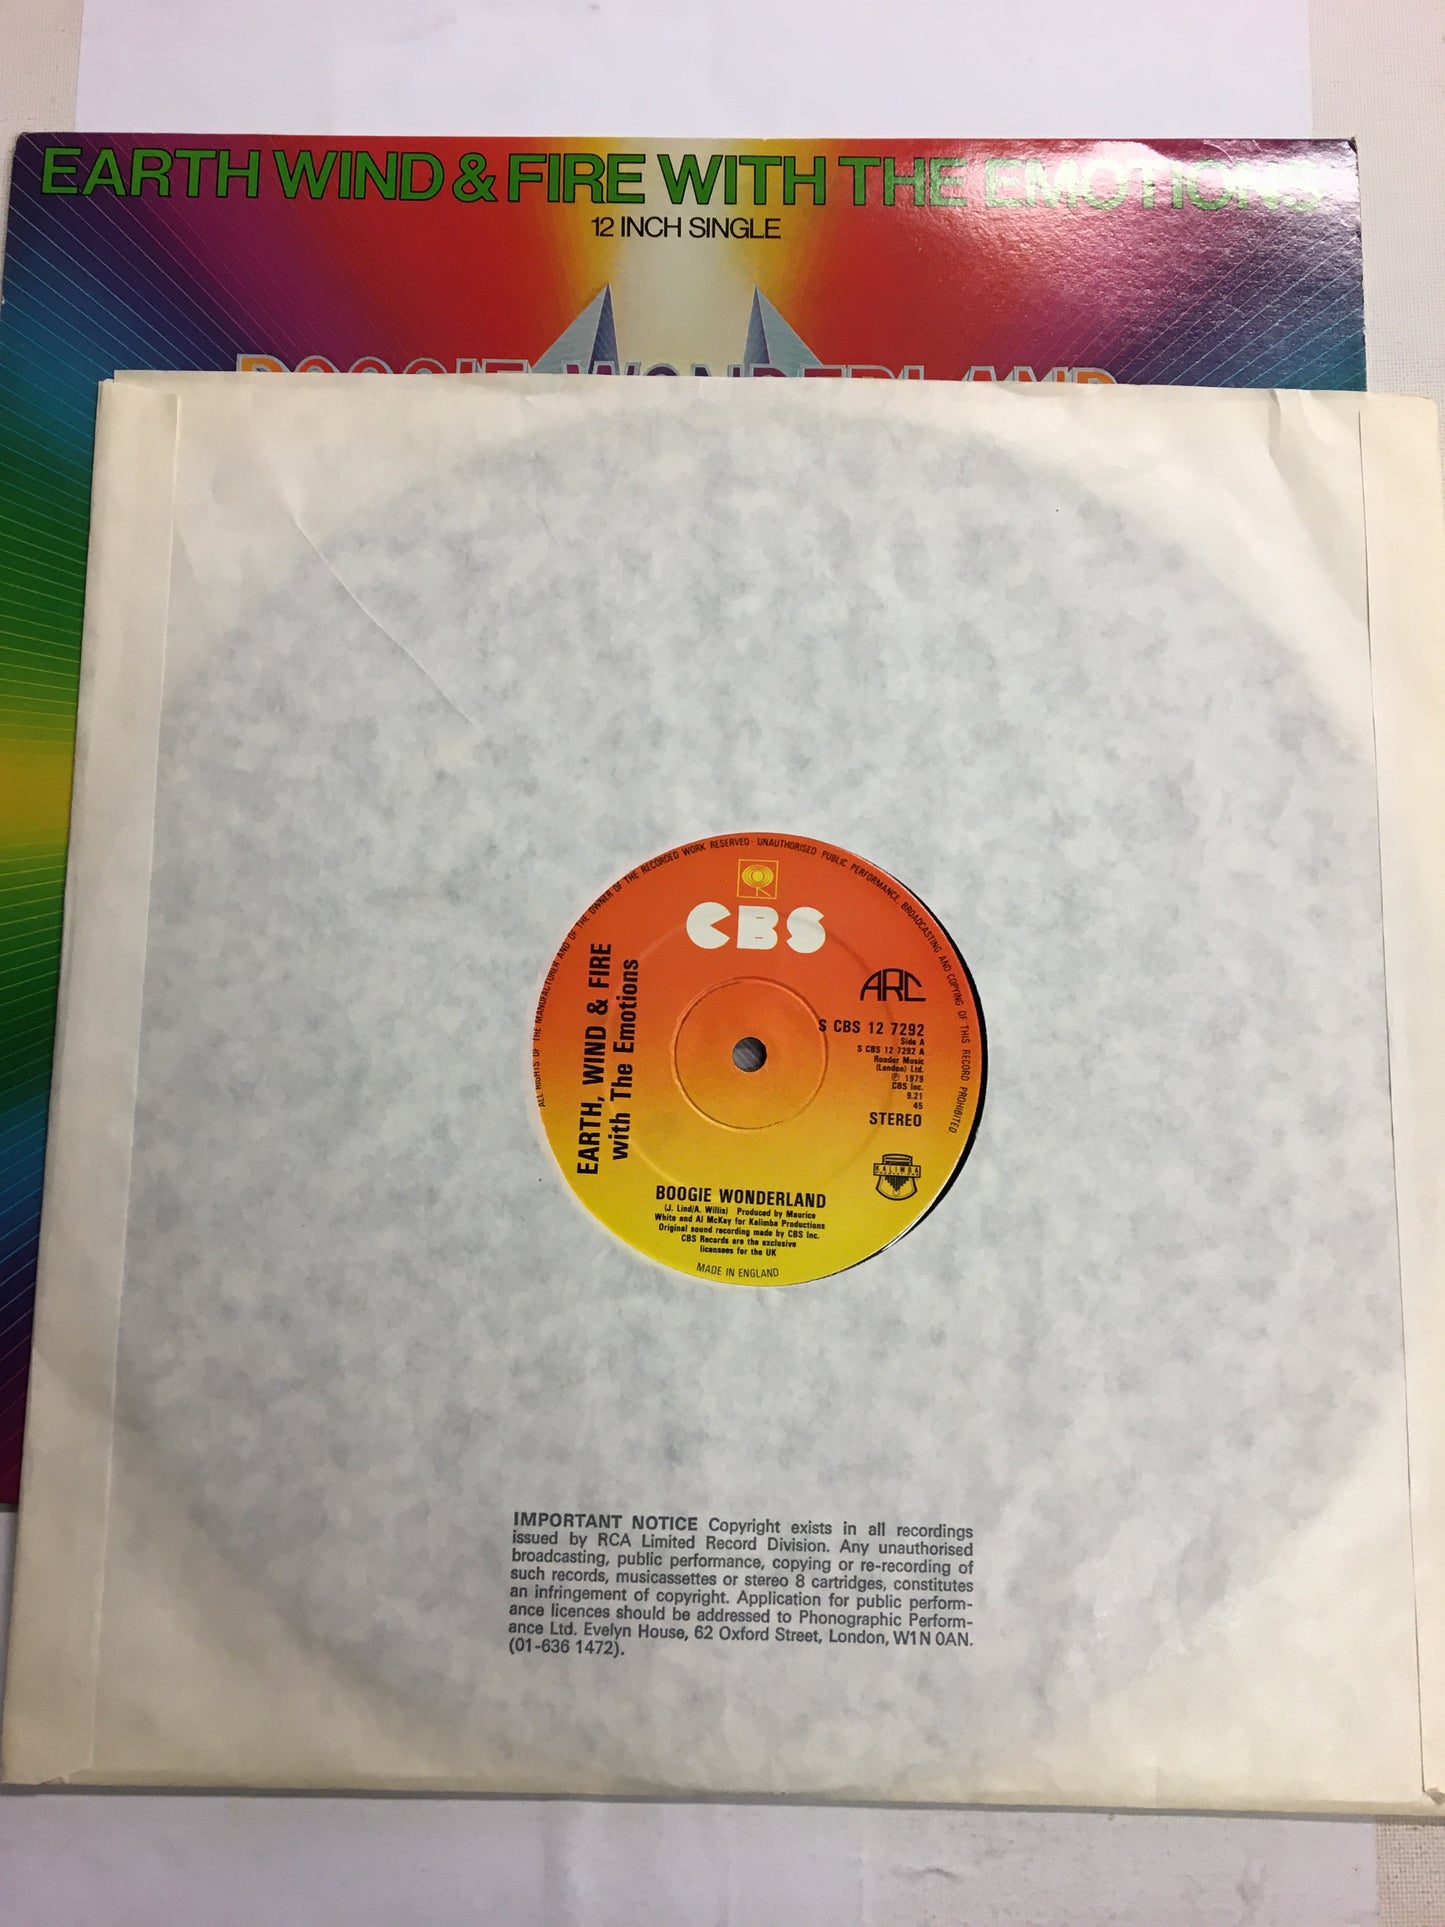 Earth Wind & Fire with The Emotions 12” Boogie Wonderland Disco